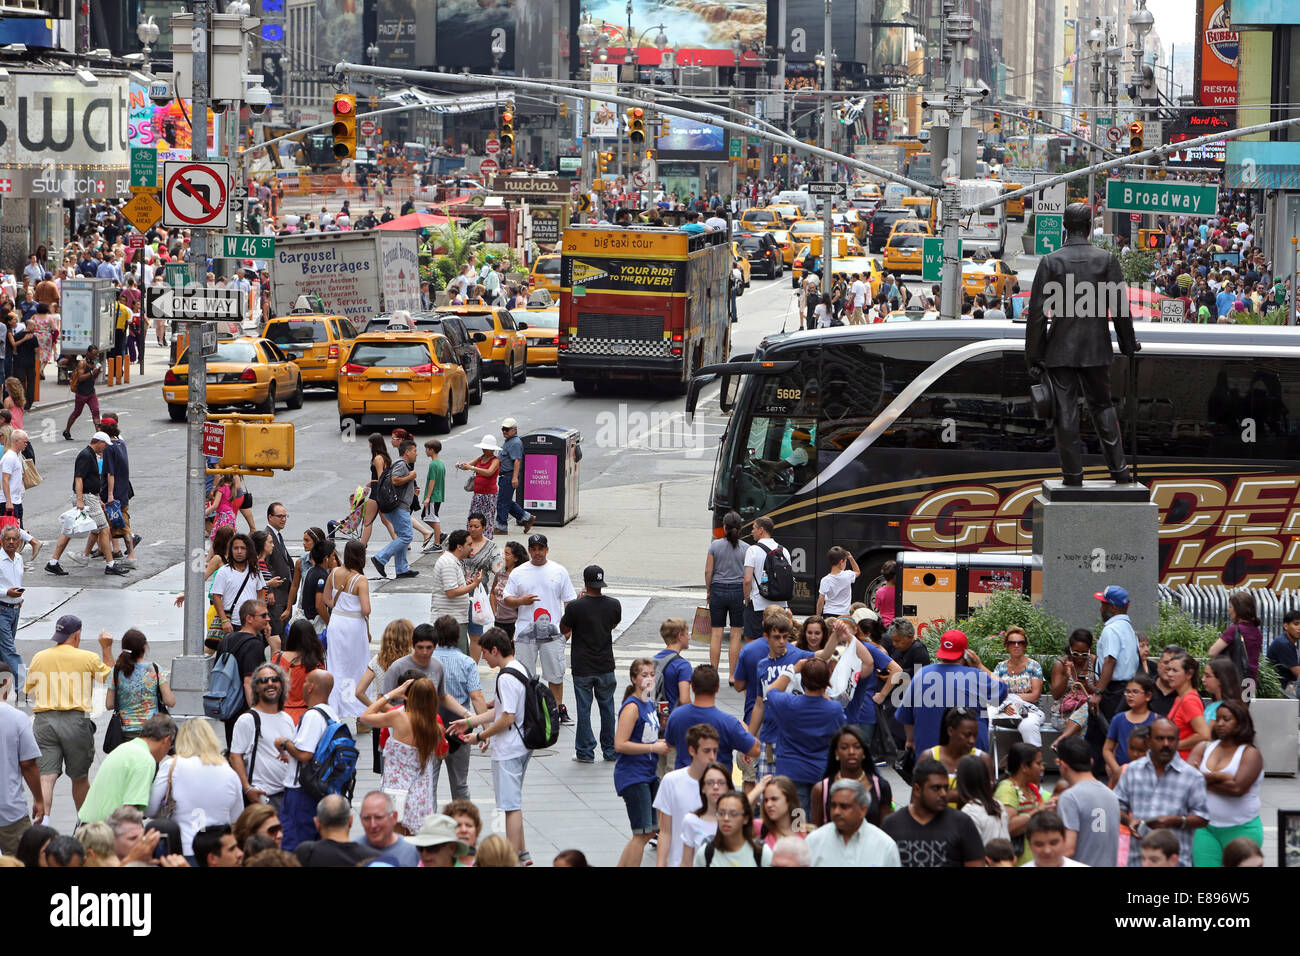 New York, United States, people in Times Square Stock Photo